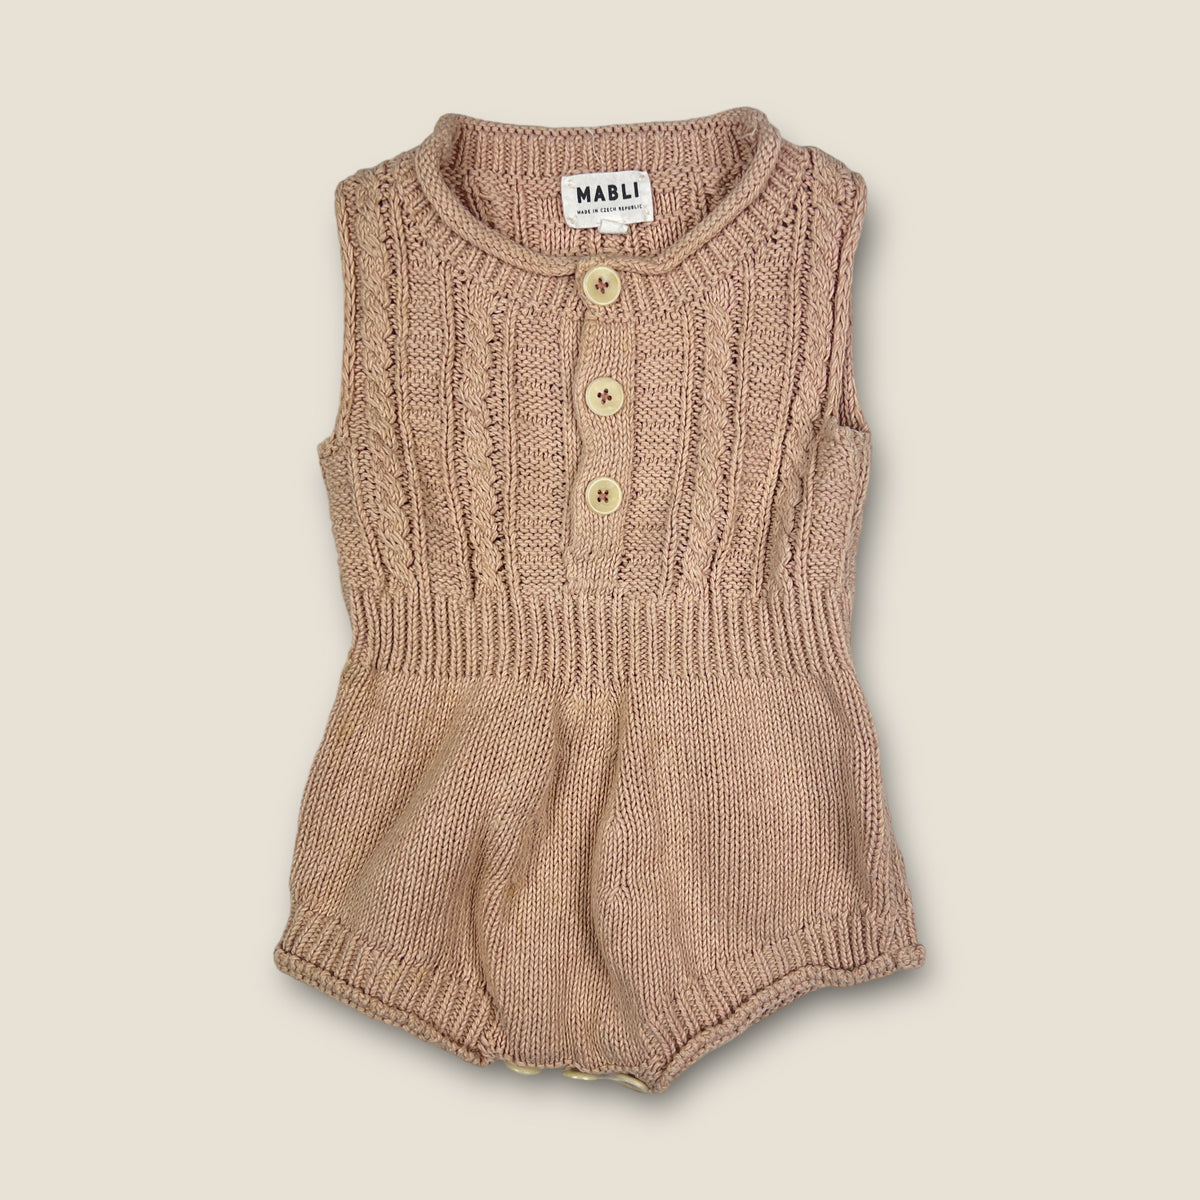 Mabli Knitted Romper size 6 months